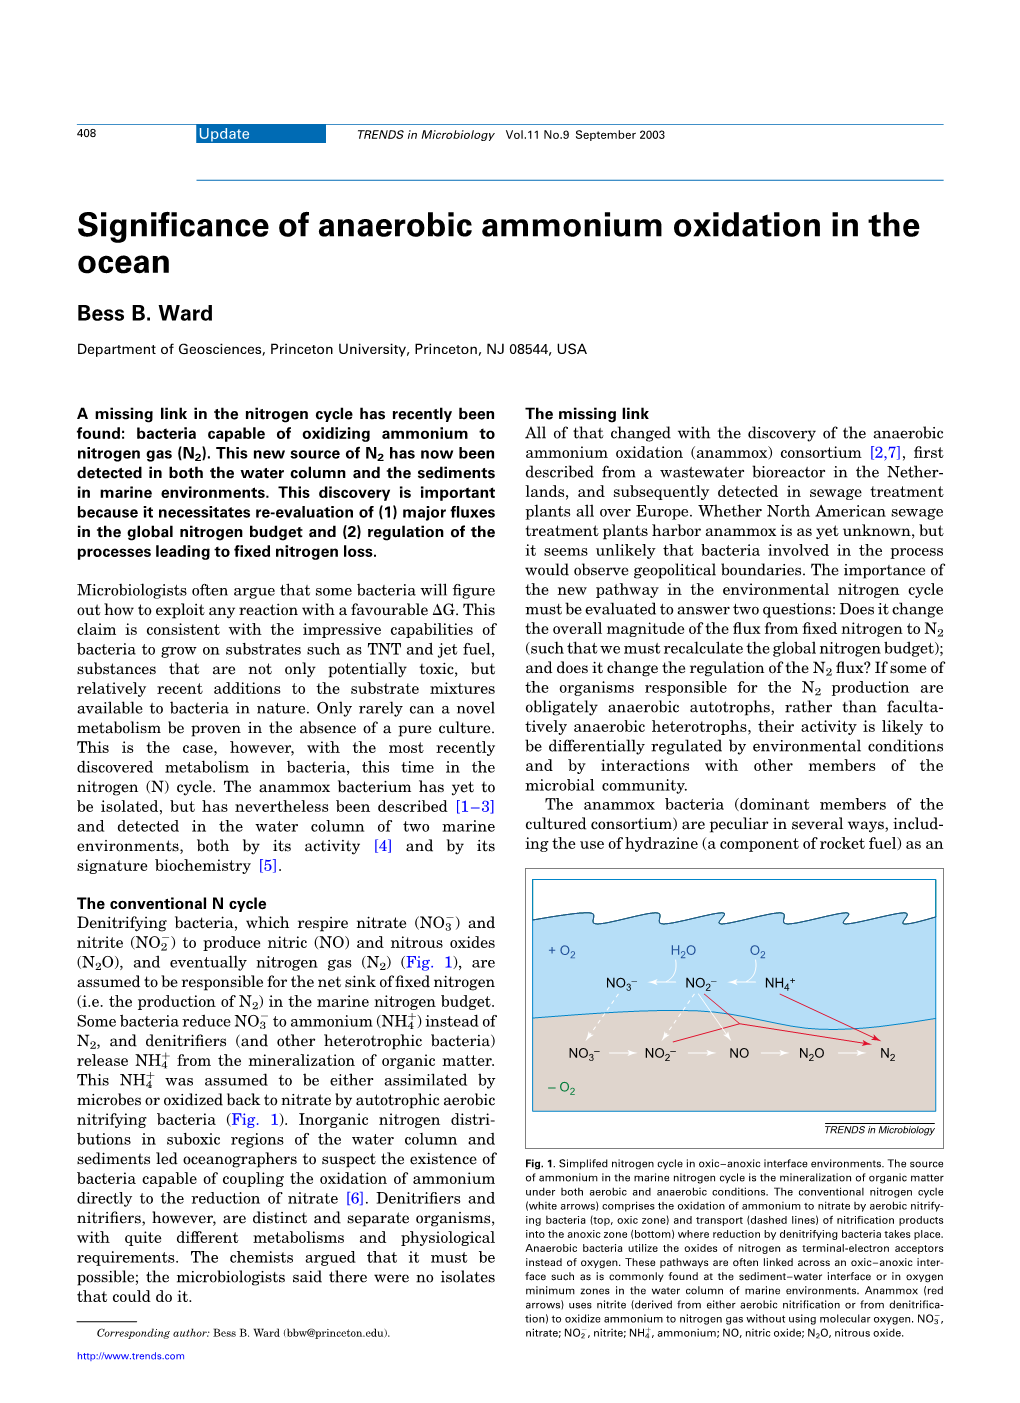 Significance of Anaerobic Ammonium Oxidation in the Ocean